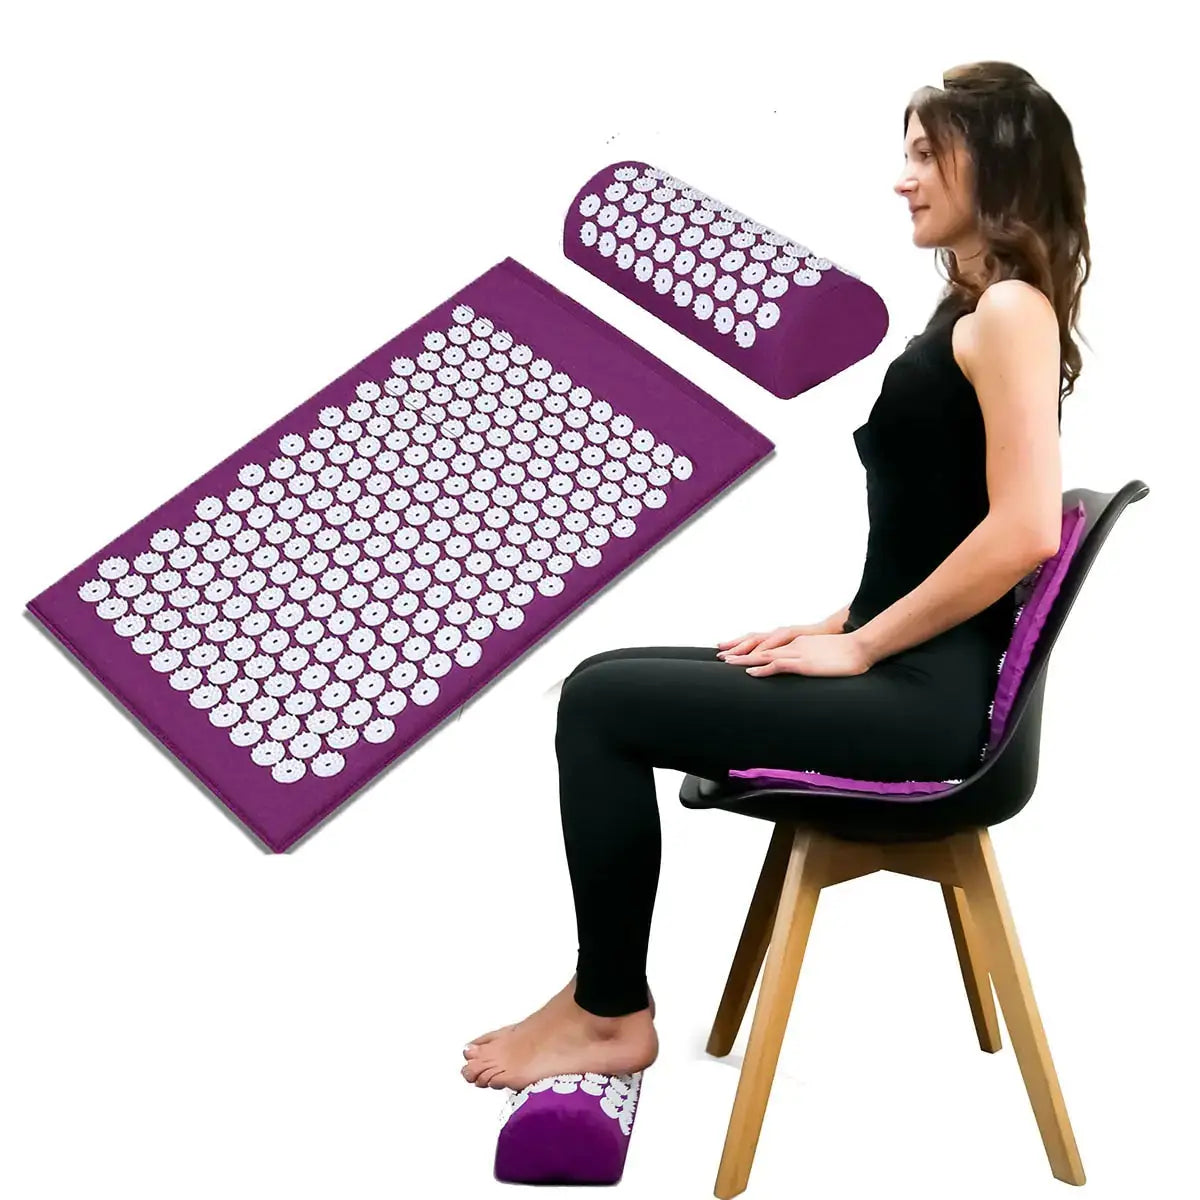 a woman sitting on top of a chair next to a purple mat